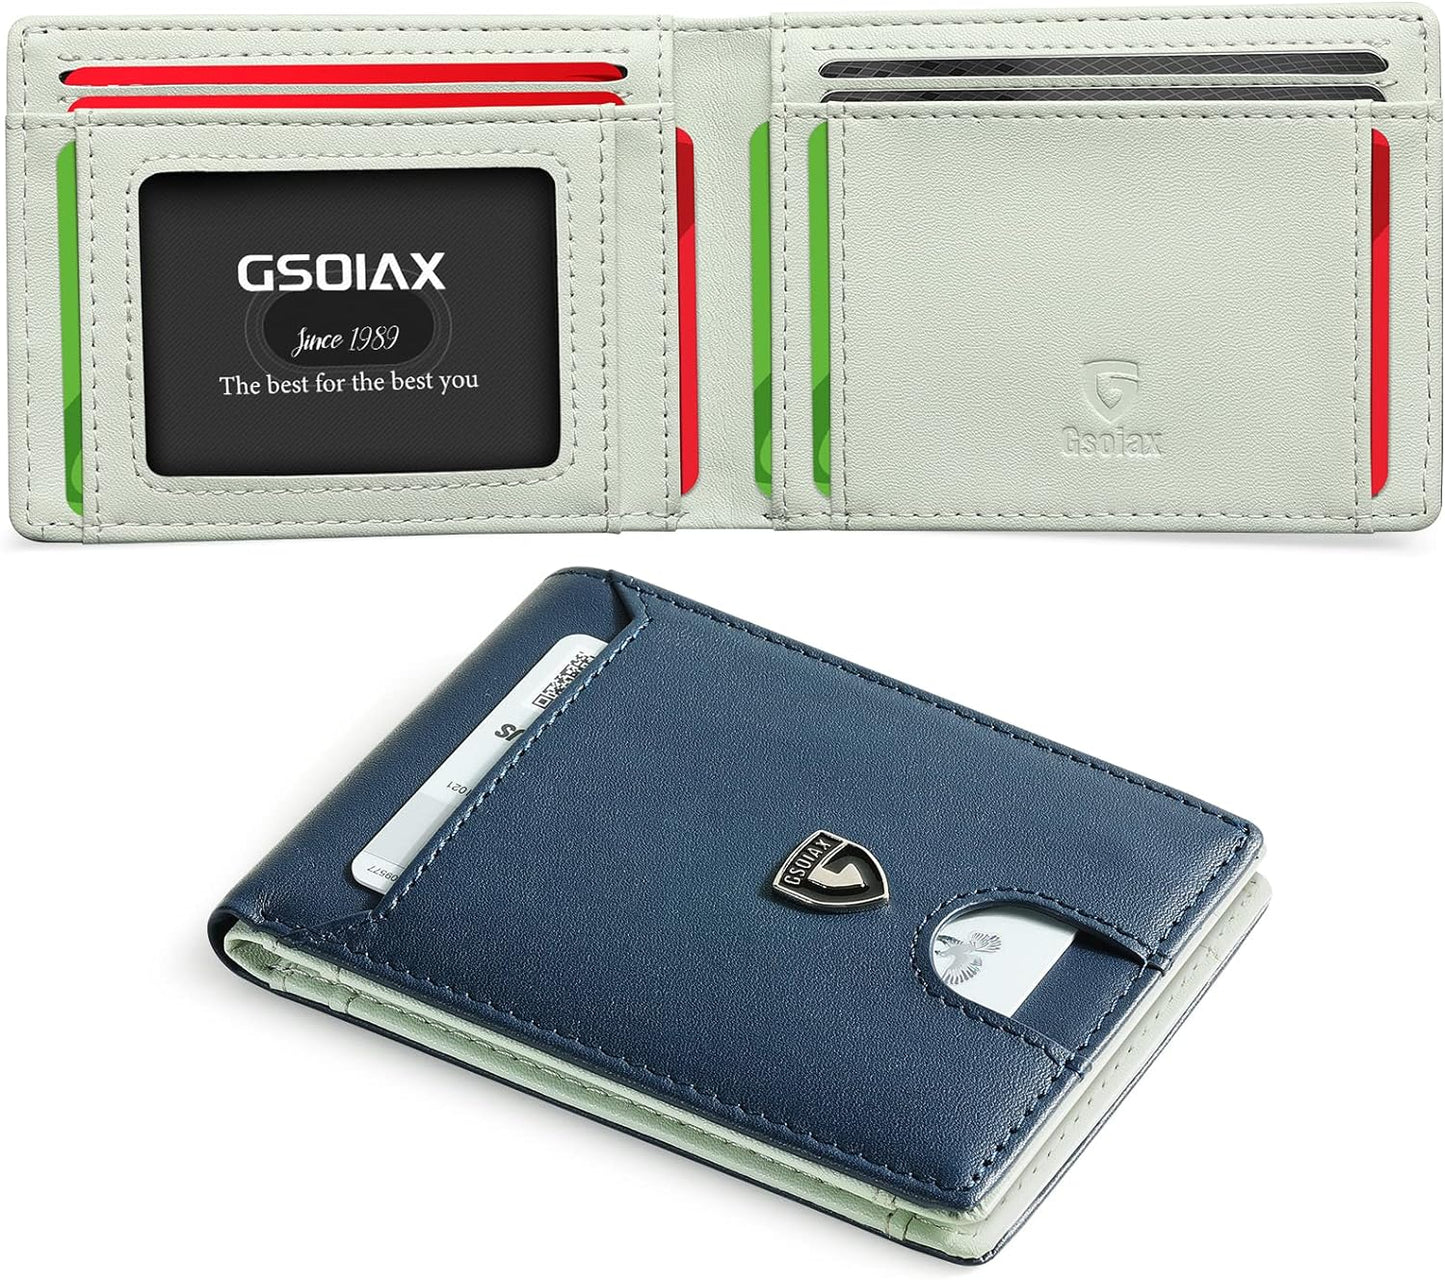 Men's RFID Blocking Slim Bifold Wallet in Genuine Leather with Money Clip and Gift Box